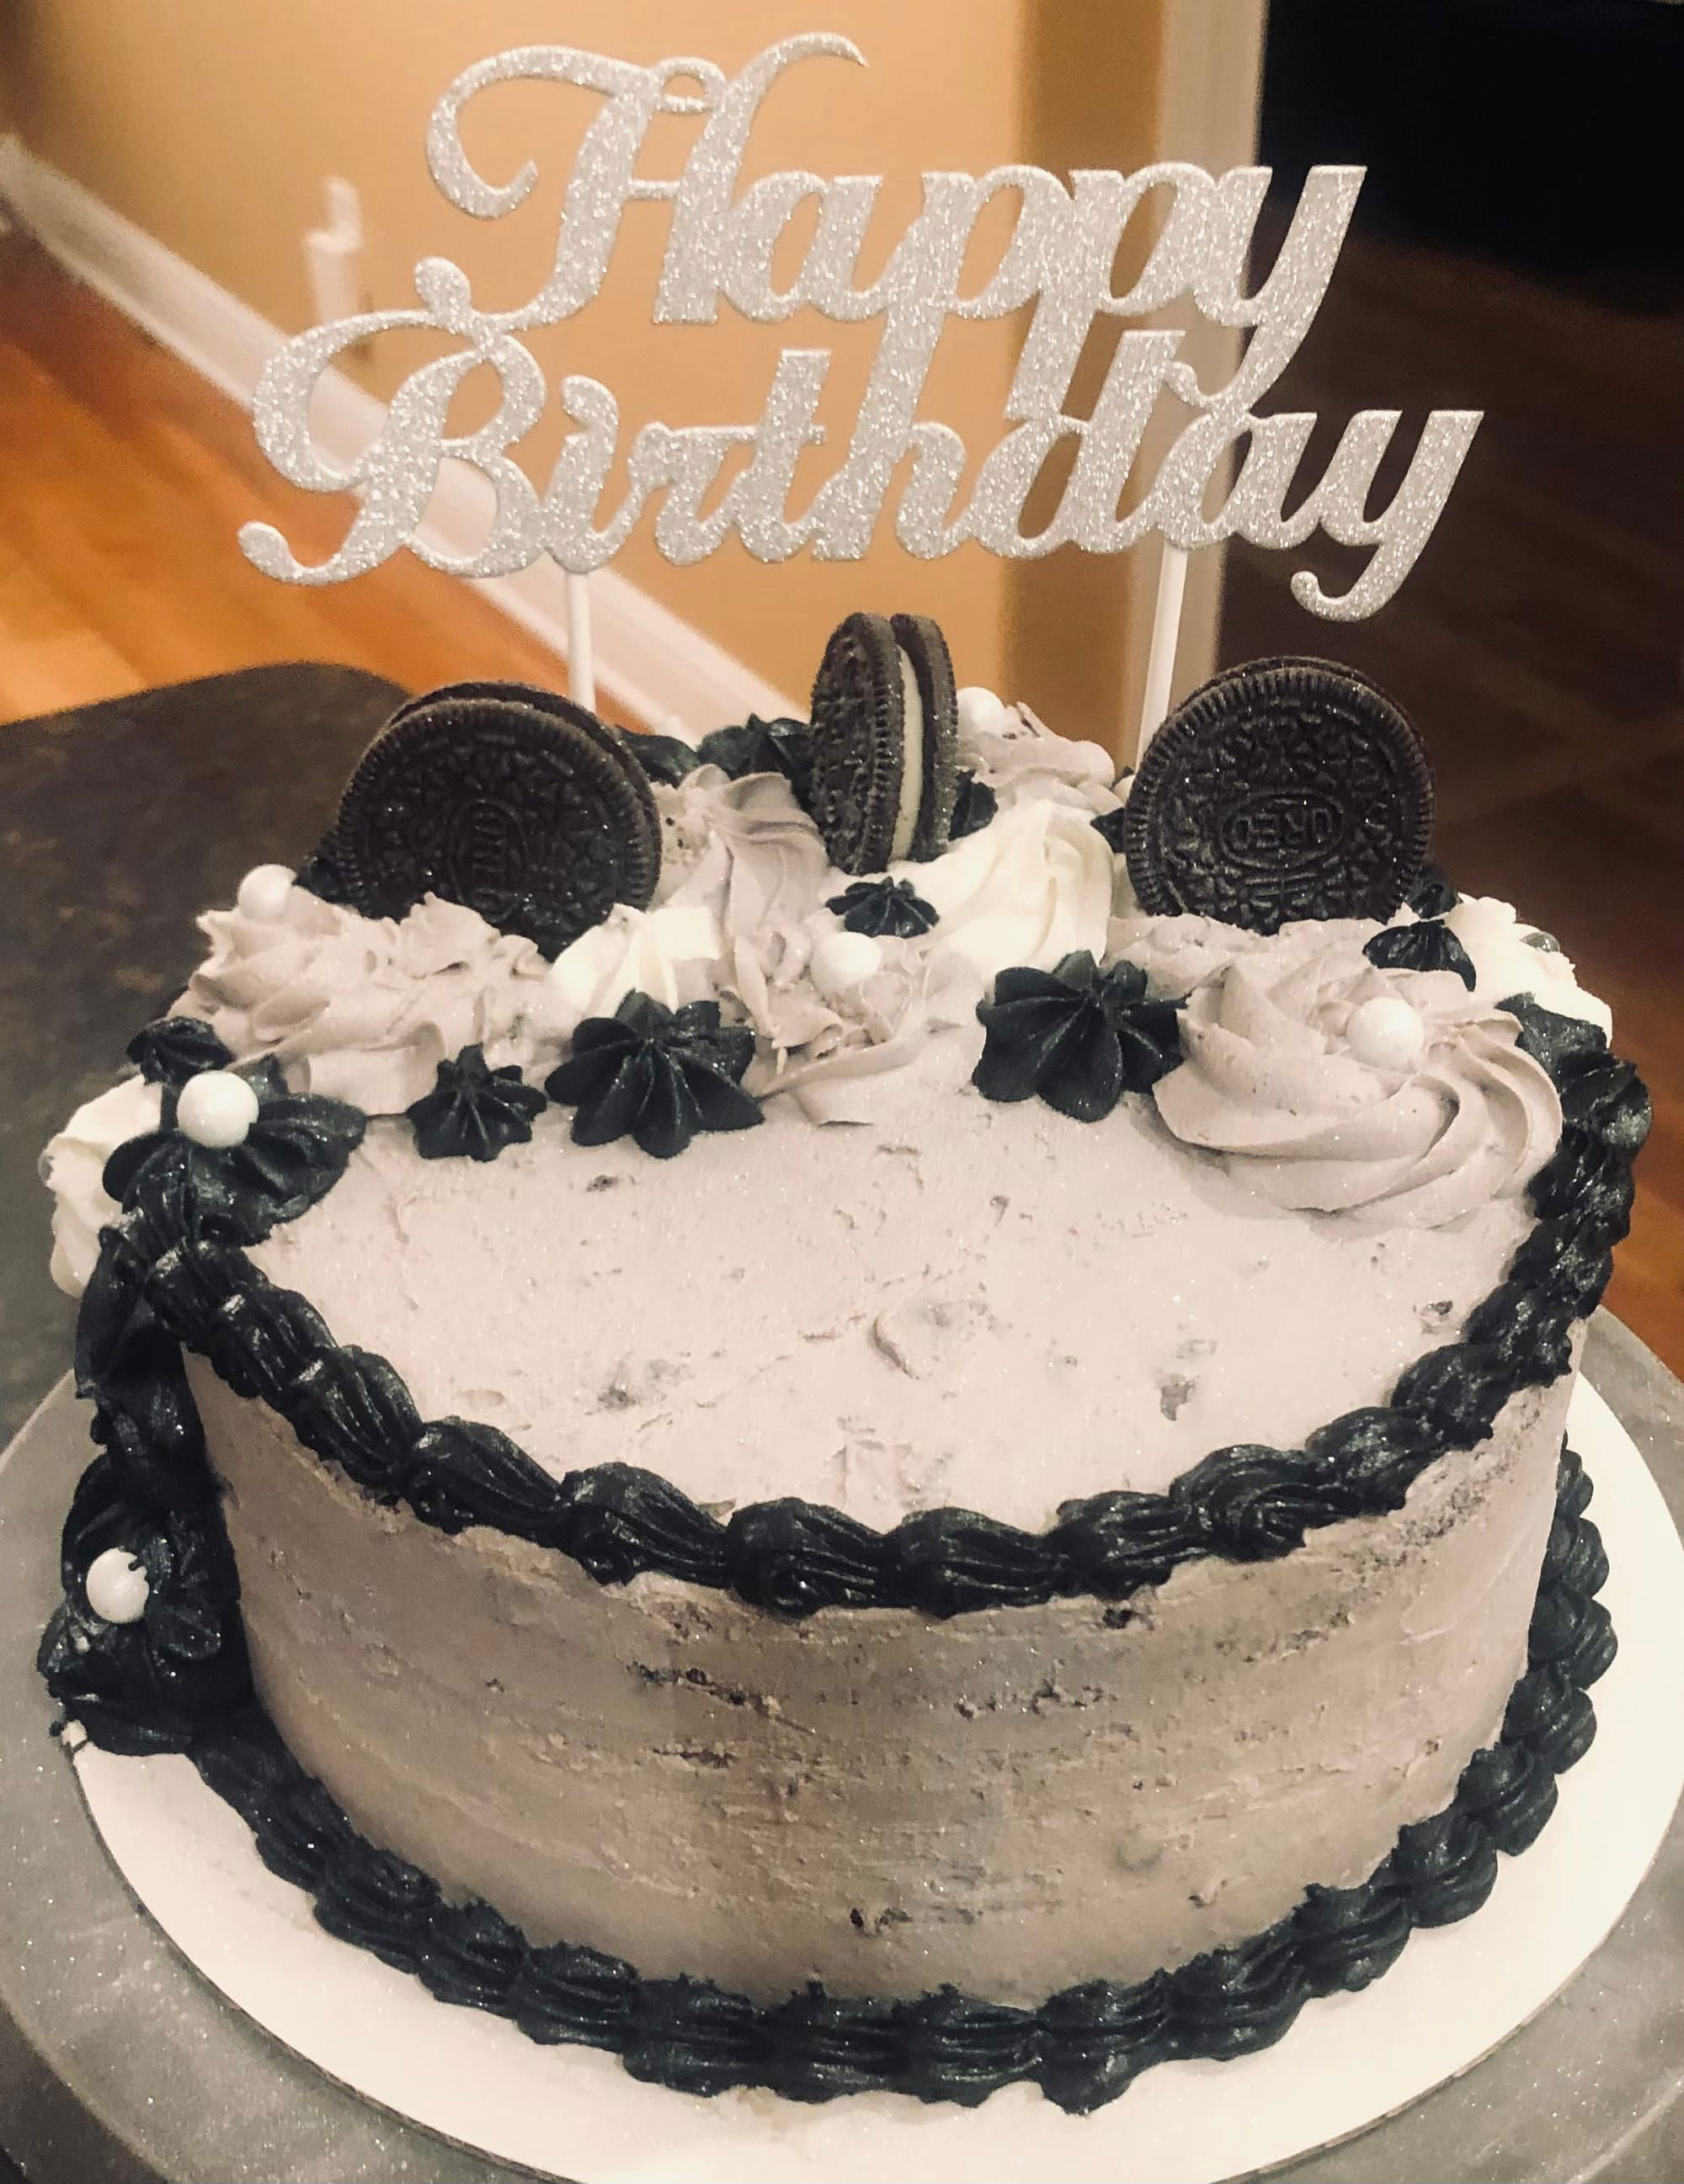 2 Layer Oreo Cookies Cake with Oreo Cookies Frosting